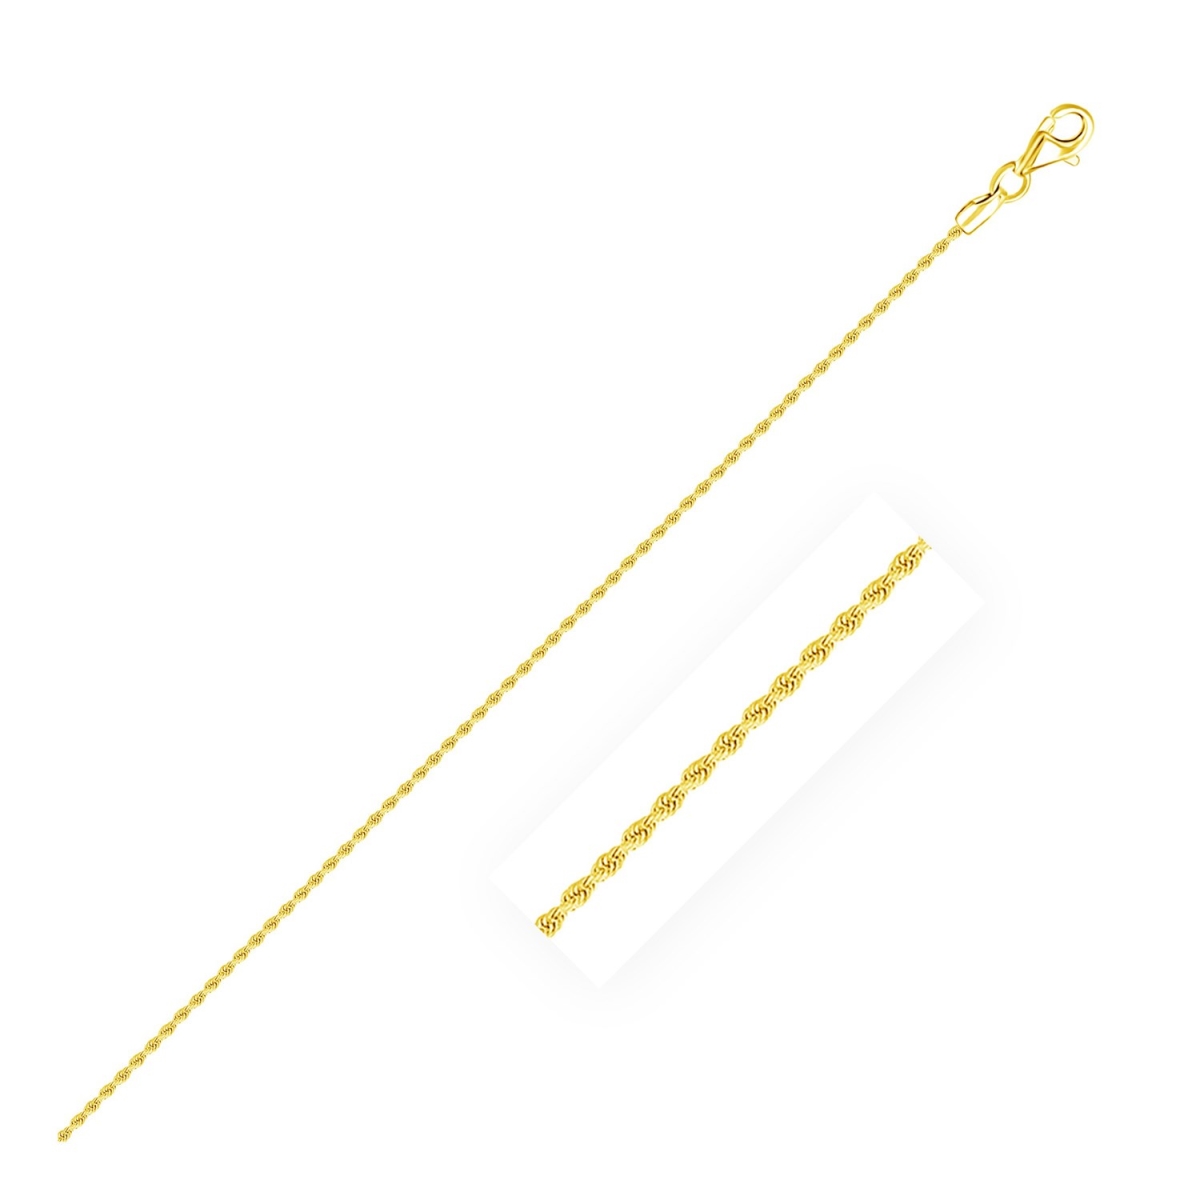 D8686746-22 10k Yellow Gold Solid Diamond Cut Rope Chain, 1.25 Mm - Size 22 In.